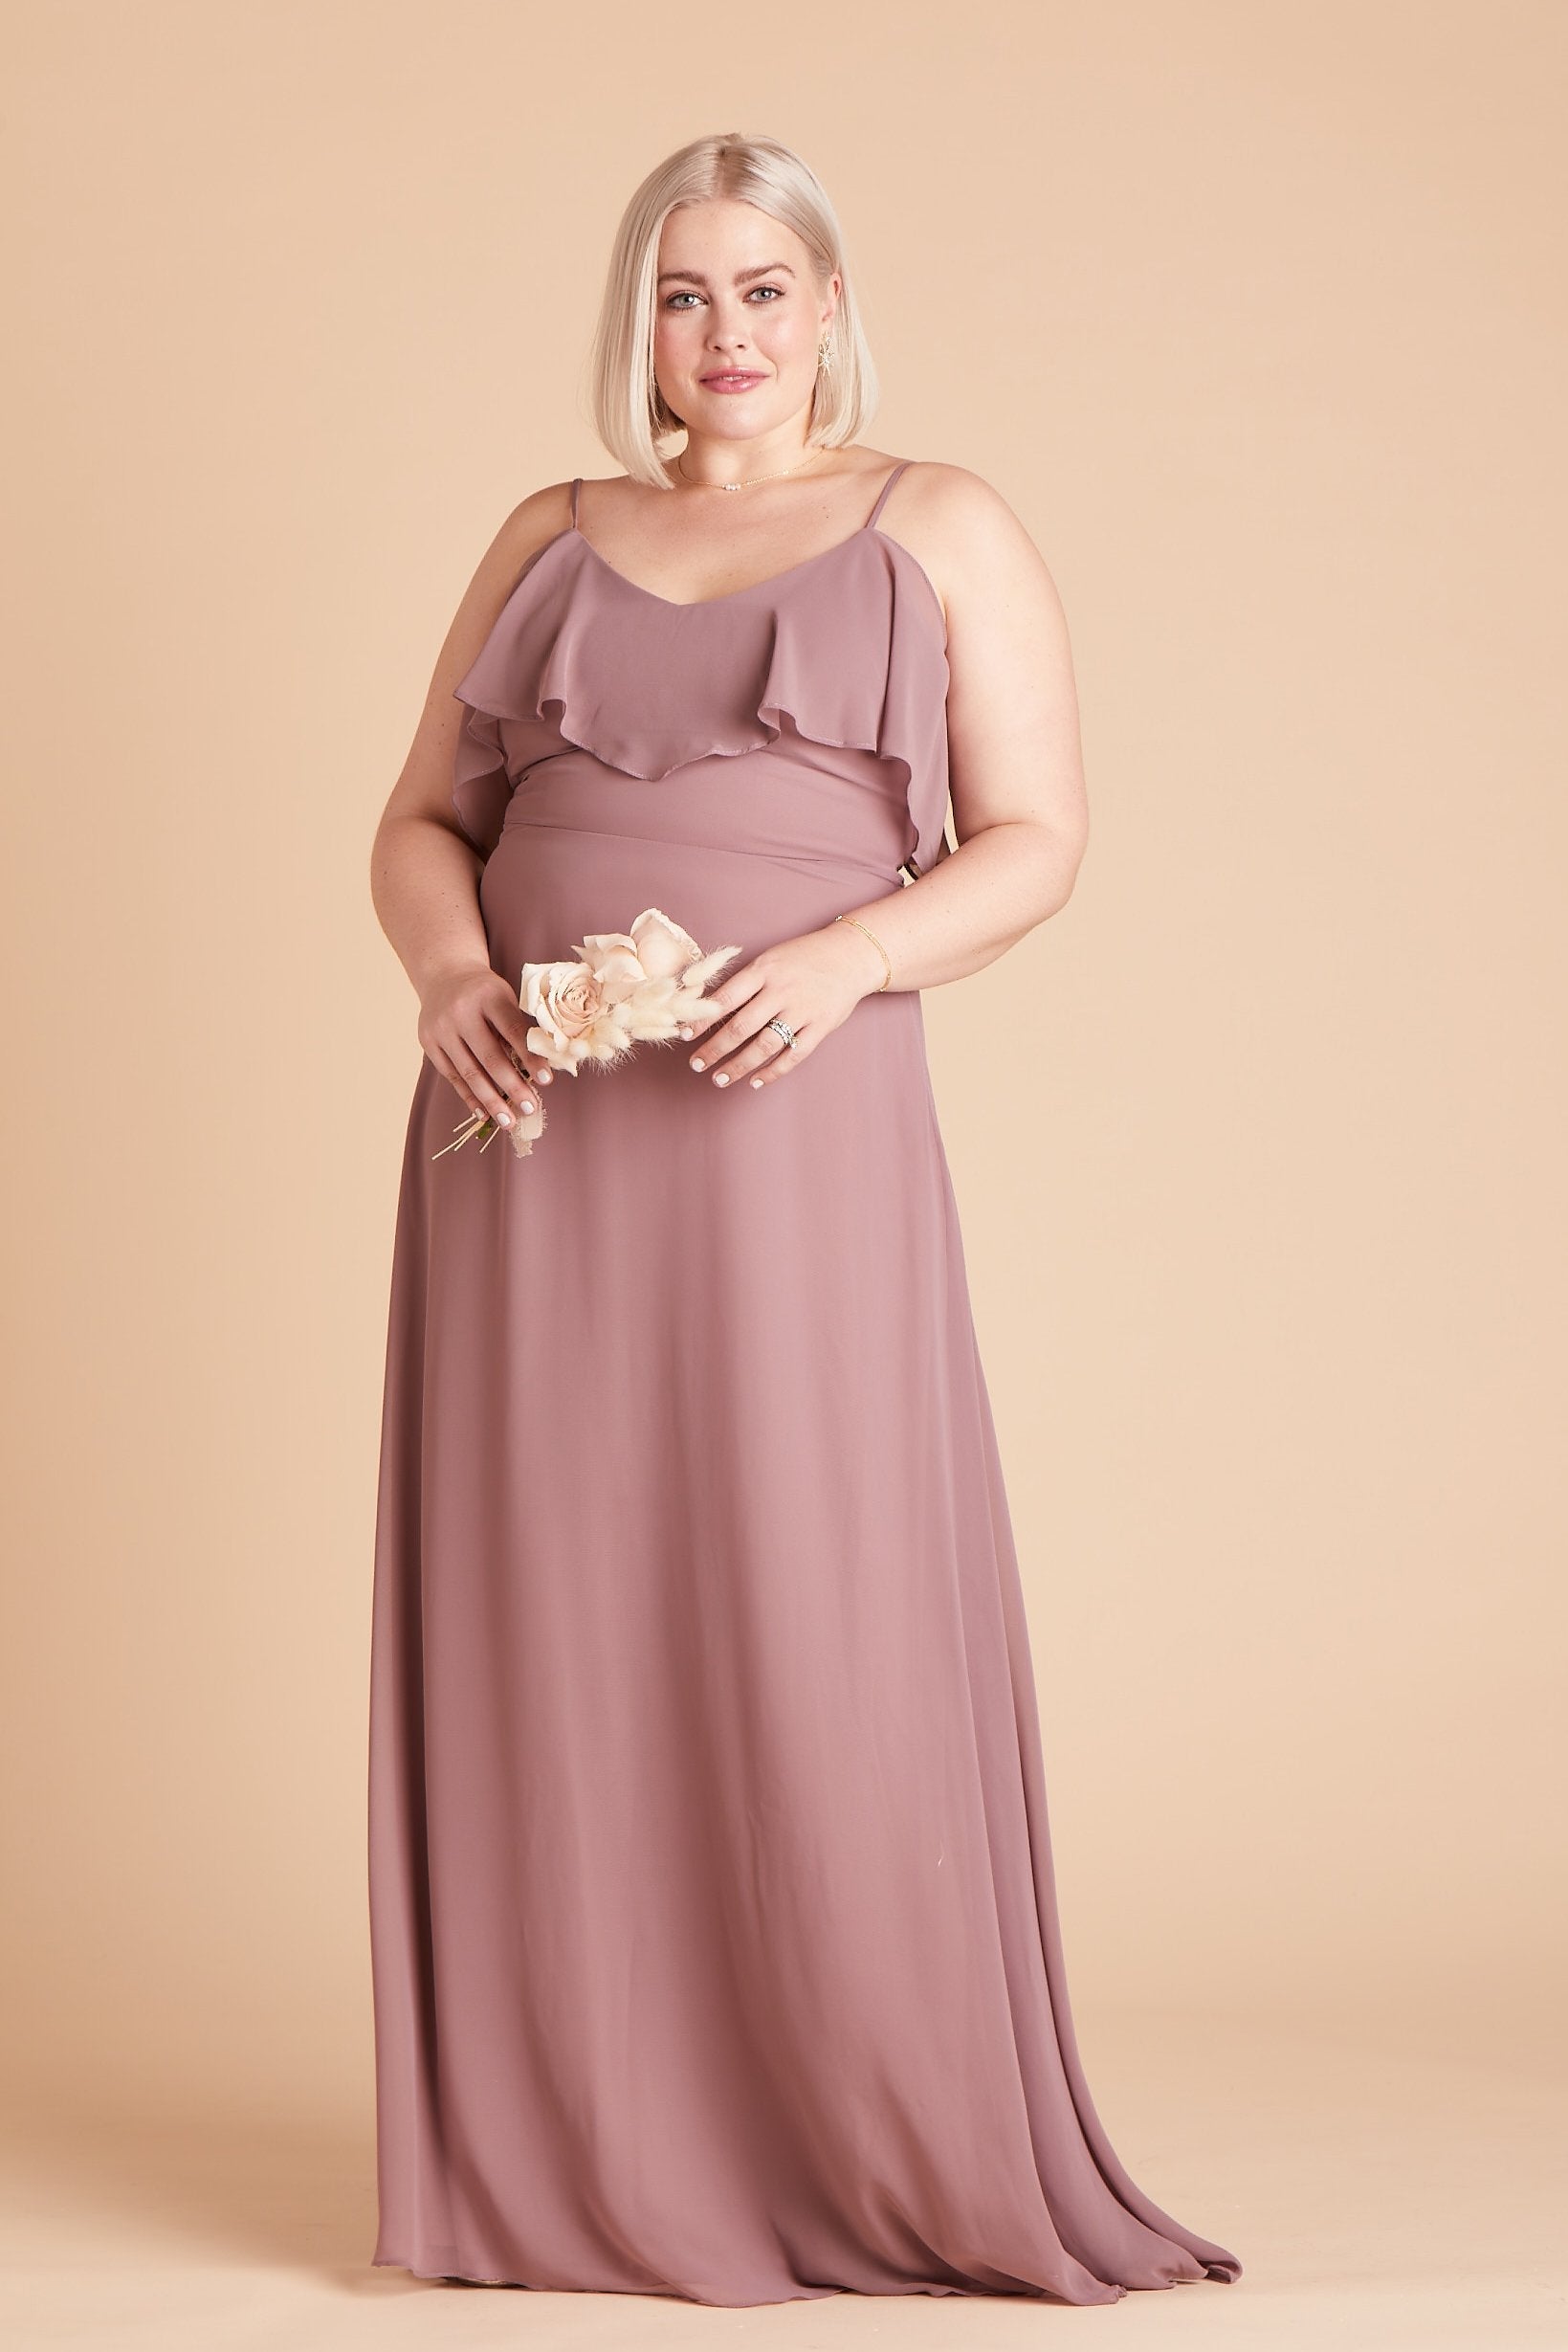 Jane convertible plus size bridesmaid dress in dark mauve chiffon by Birdy Grey, front view